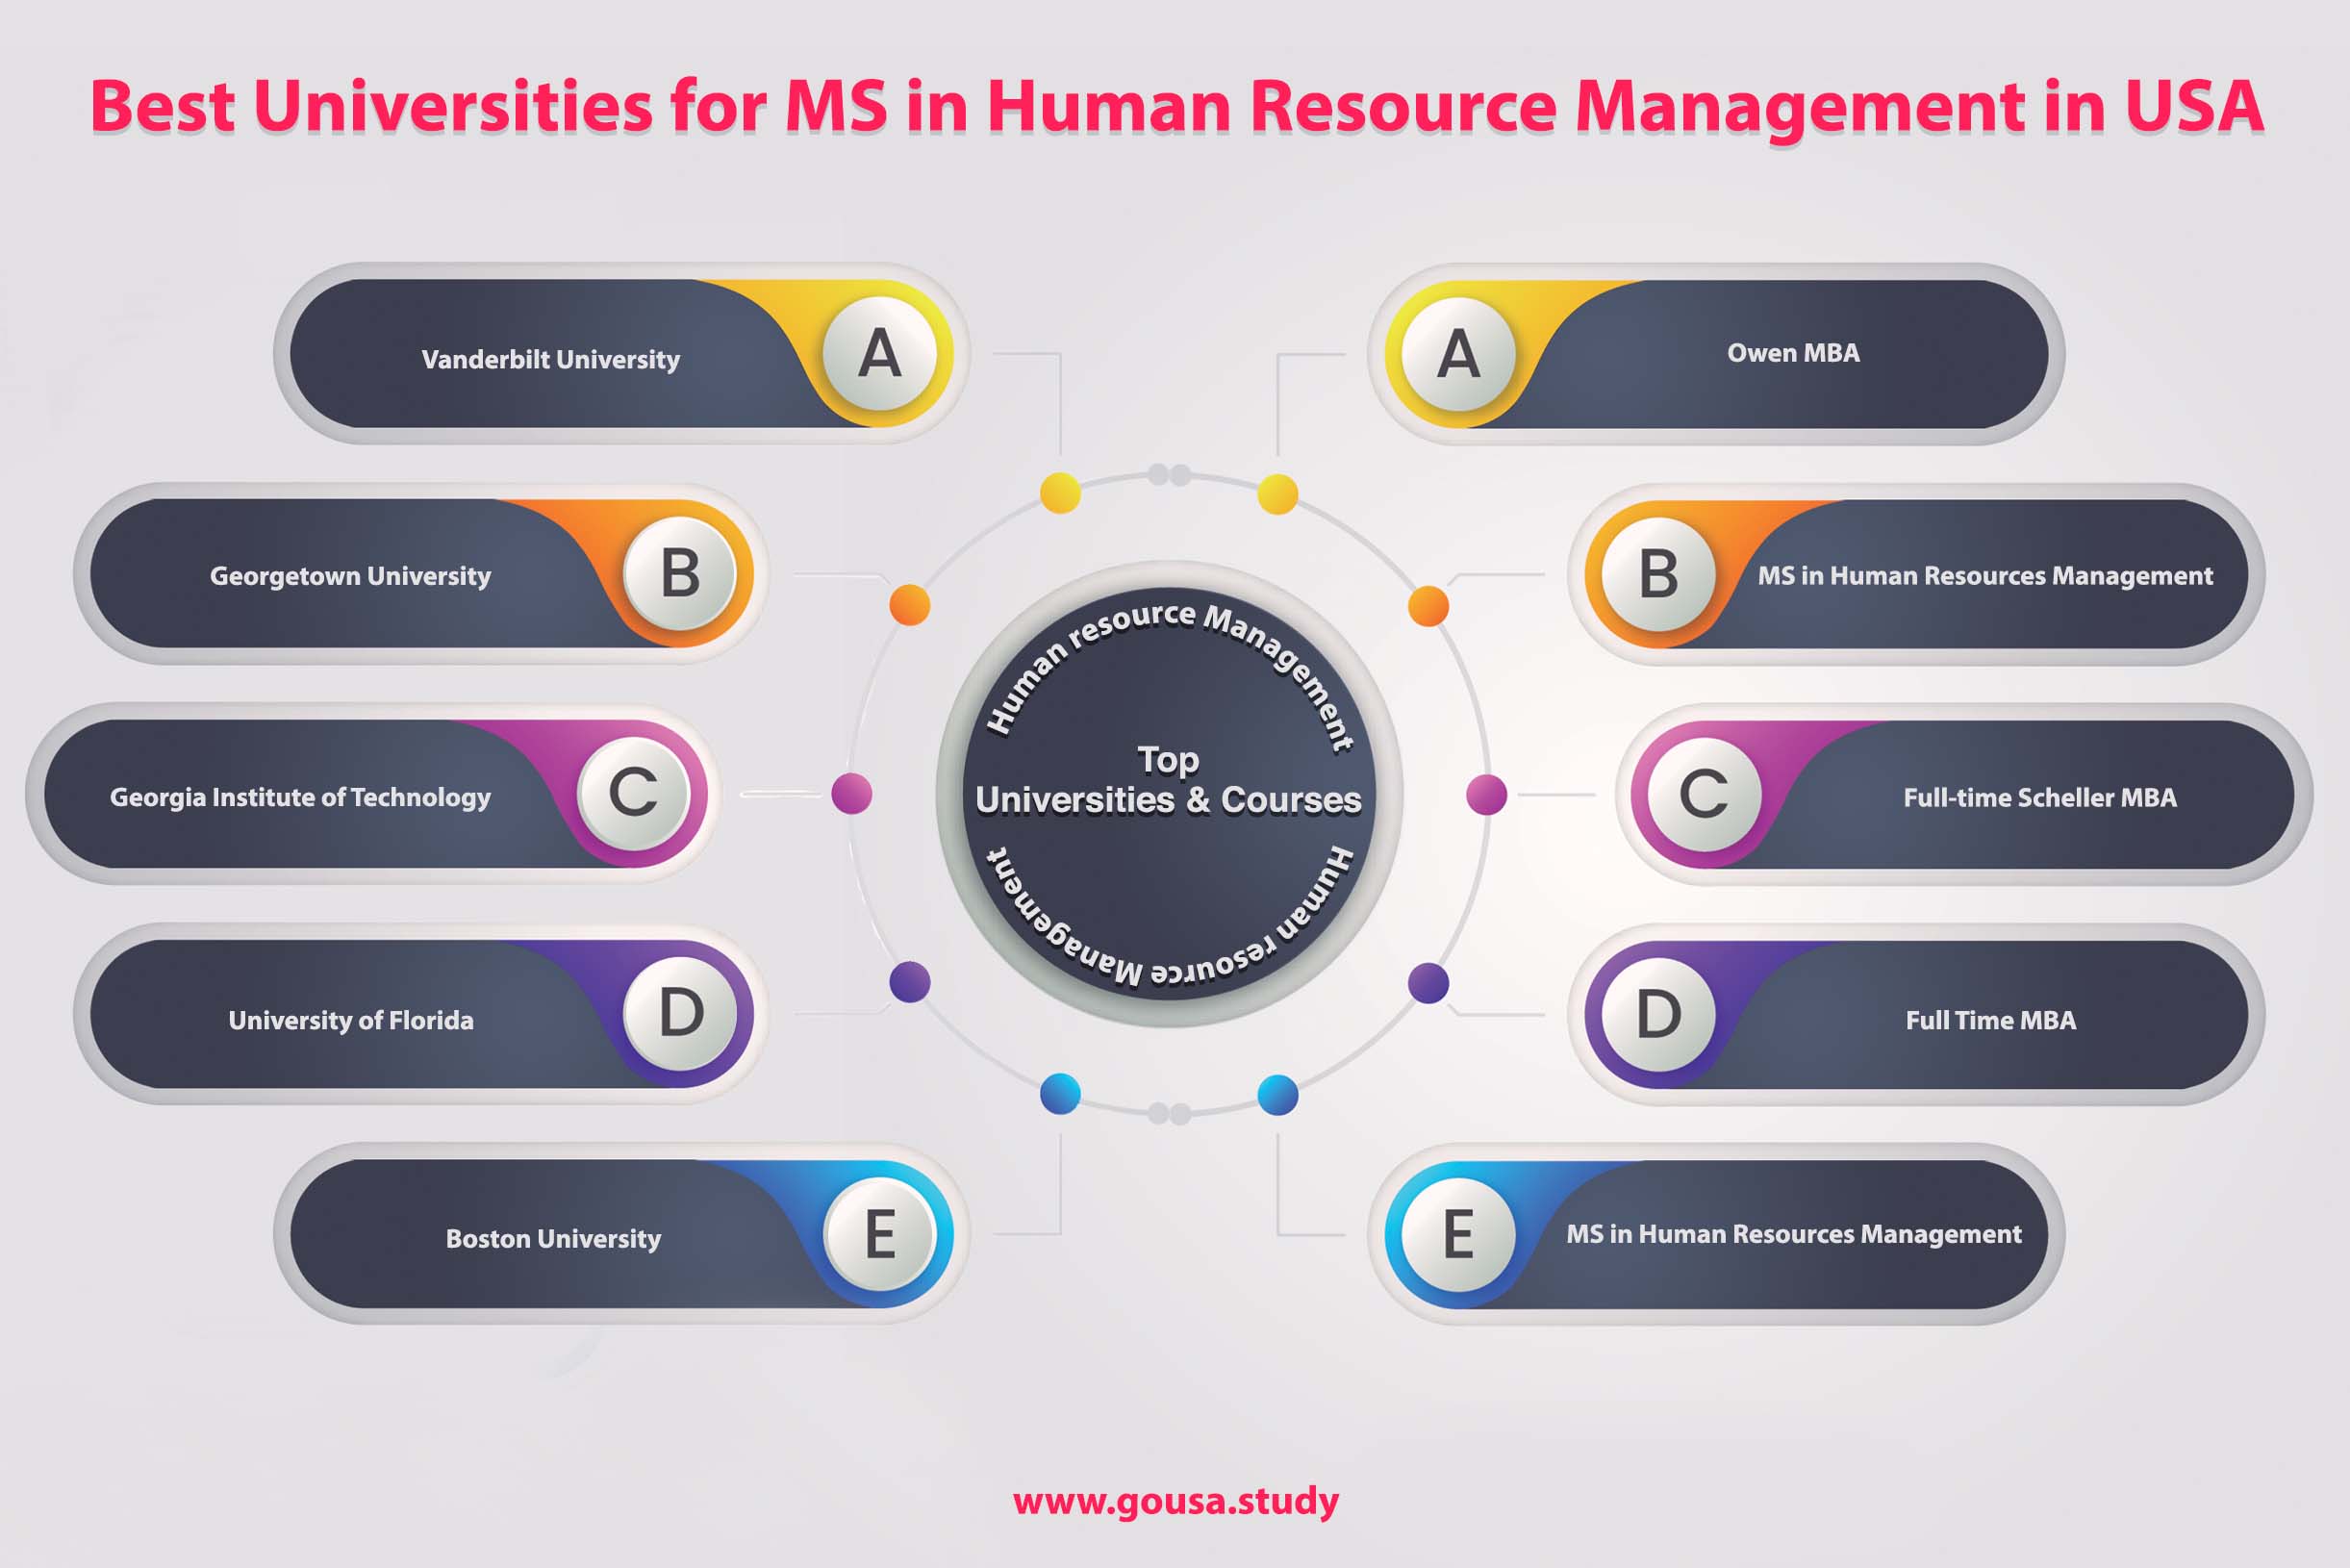 Best Universities for MS in Human Resource Management in USA